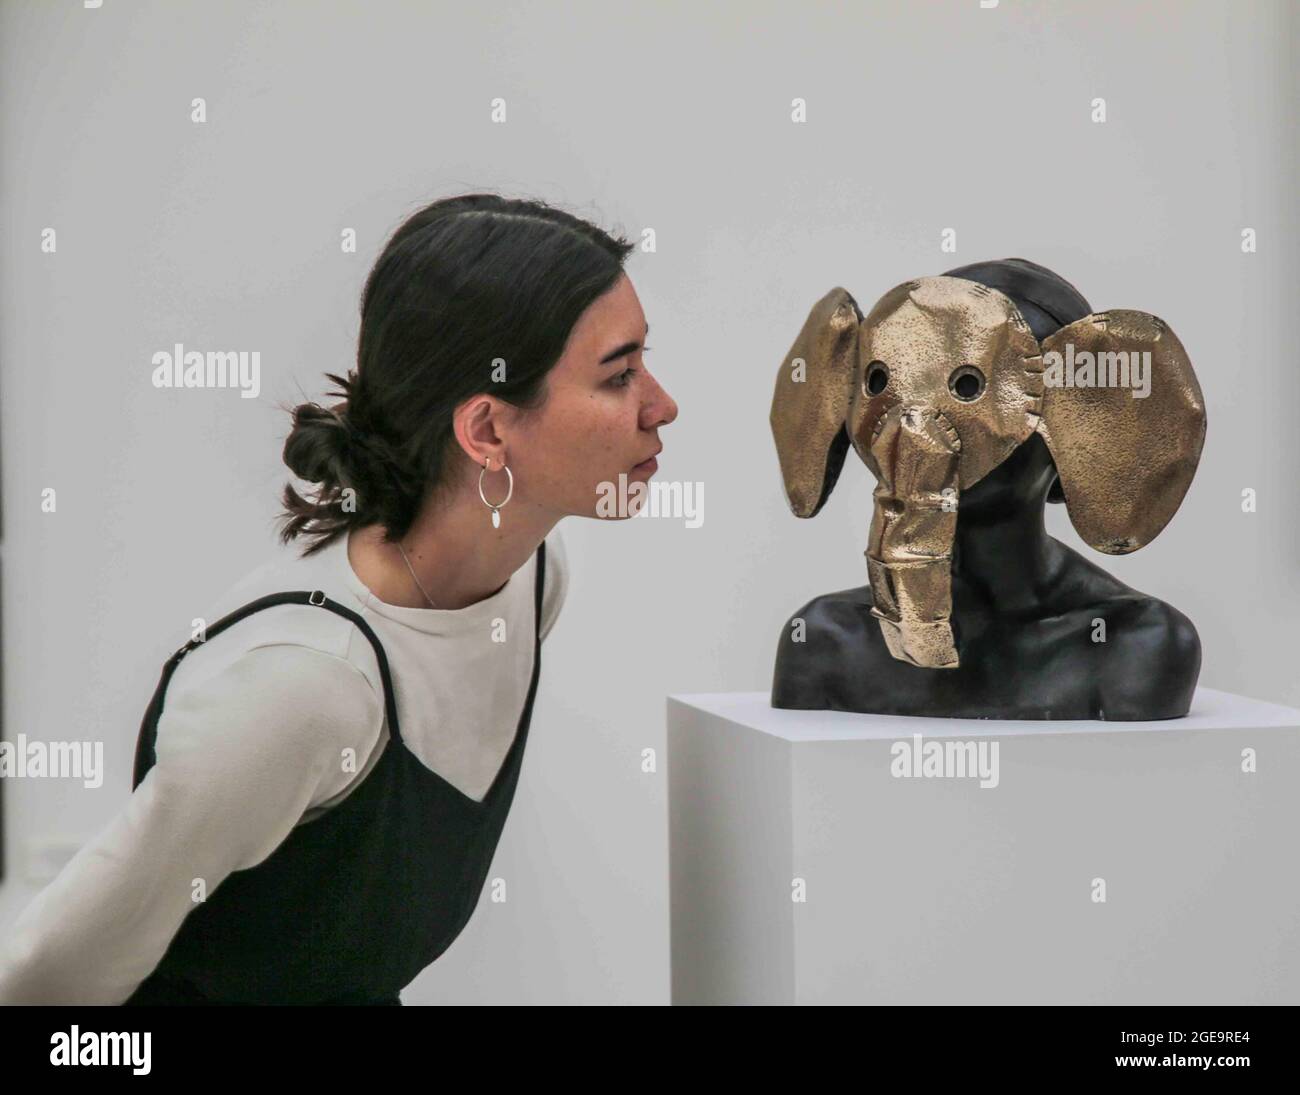 London UK 18 August 2021 RIGHT HERE RIGHT NOW. Charming Baker Nellephant (bronze) 2017.The 4,000 sq. ft exhibition will open in two gallery spaces at Saatchi Gallery on Thursday, 19 August 2021 until 9 September 2021.The exhibition features artworks by established artists such as Jake & Dinos Chapman, Charming Baker, David Shrigley and Chris Levine together with works by London based painter Matt Small and mural & installation artist Morag Myerscough. The show will also include previously unseen original work by Gary Stranger, Jessica Albarn, Eelus, Sara Pope and an exciting new collaboration Stock Photo